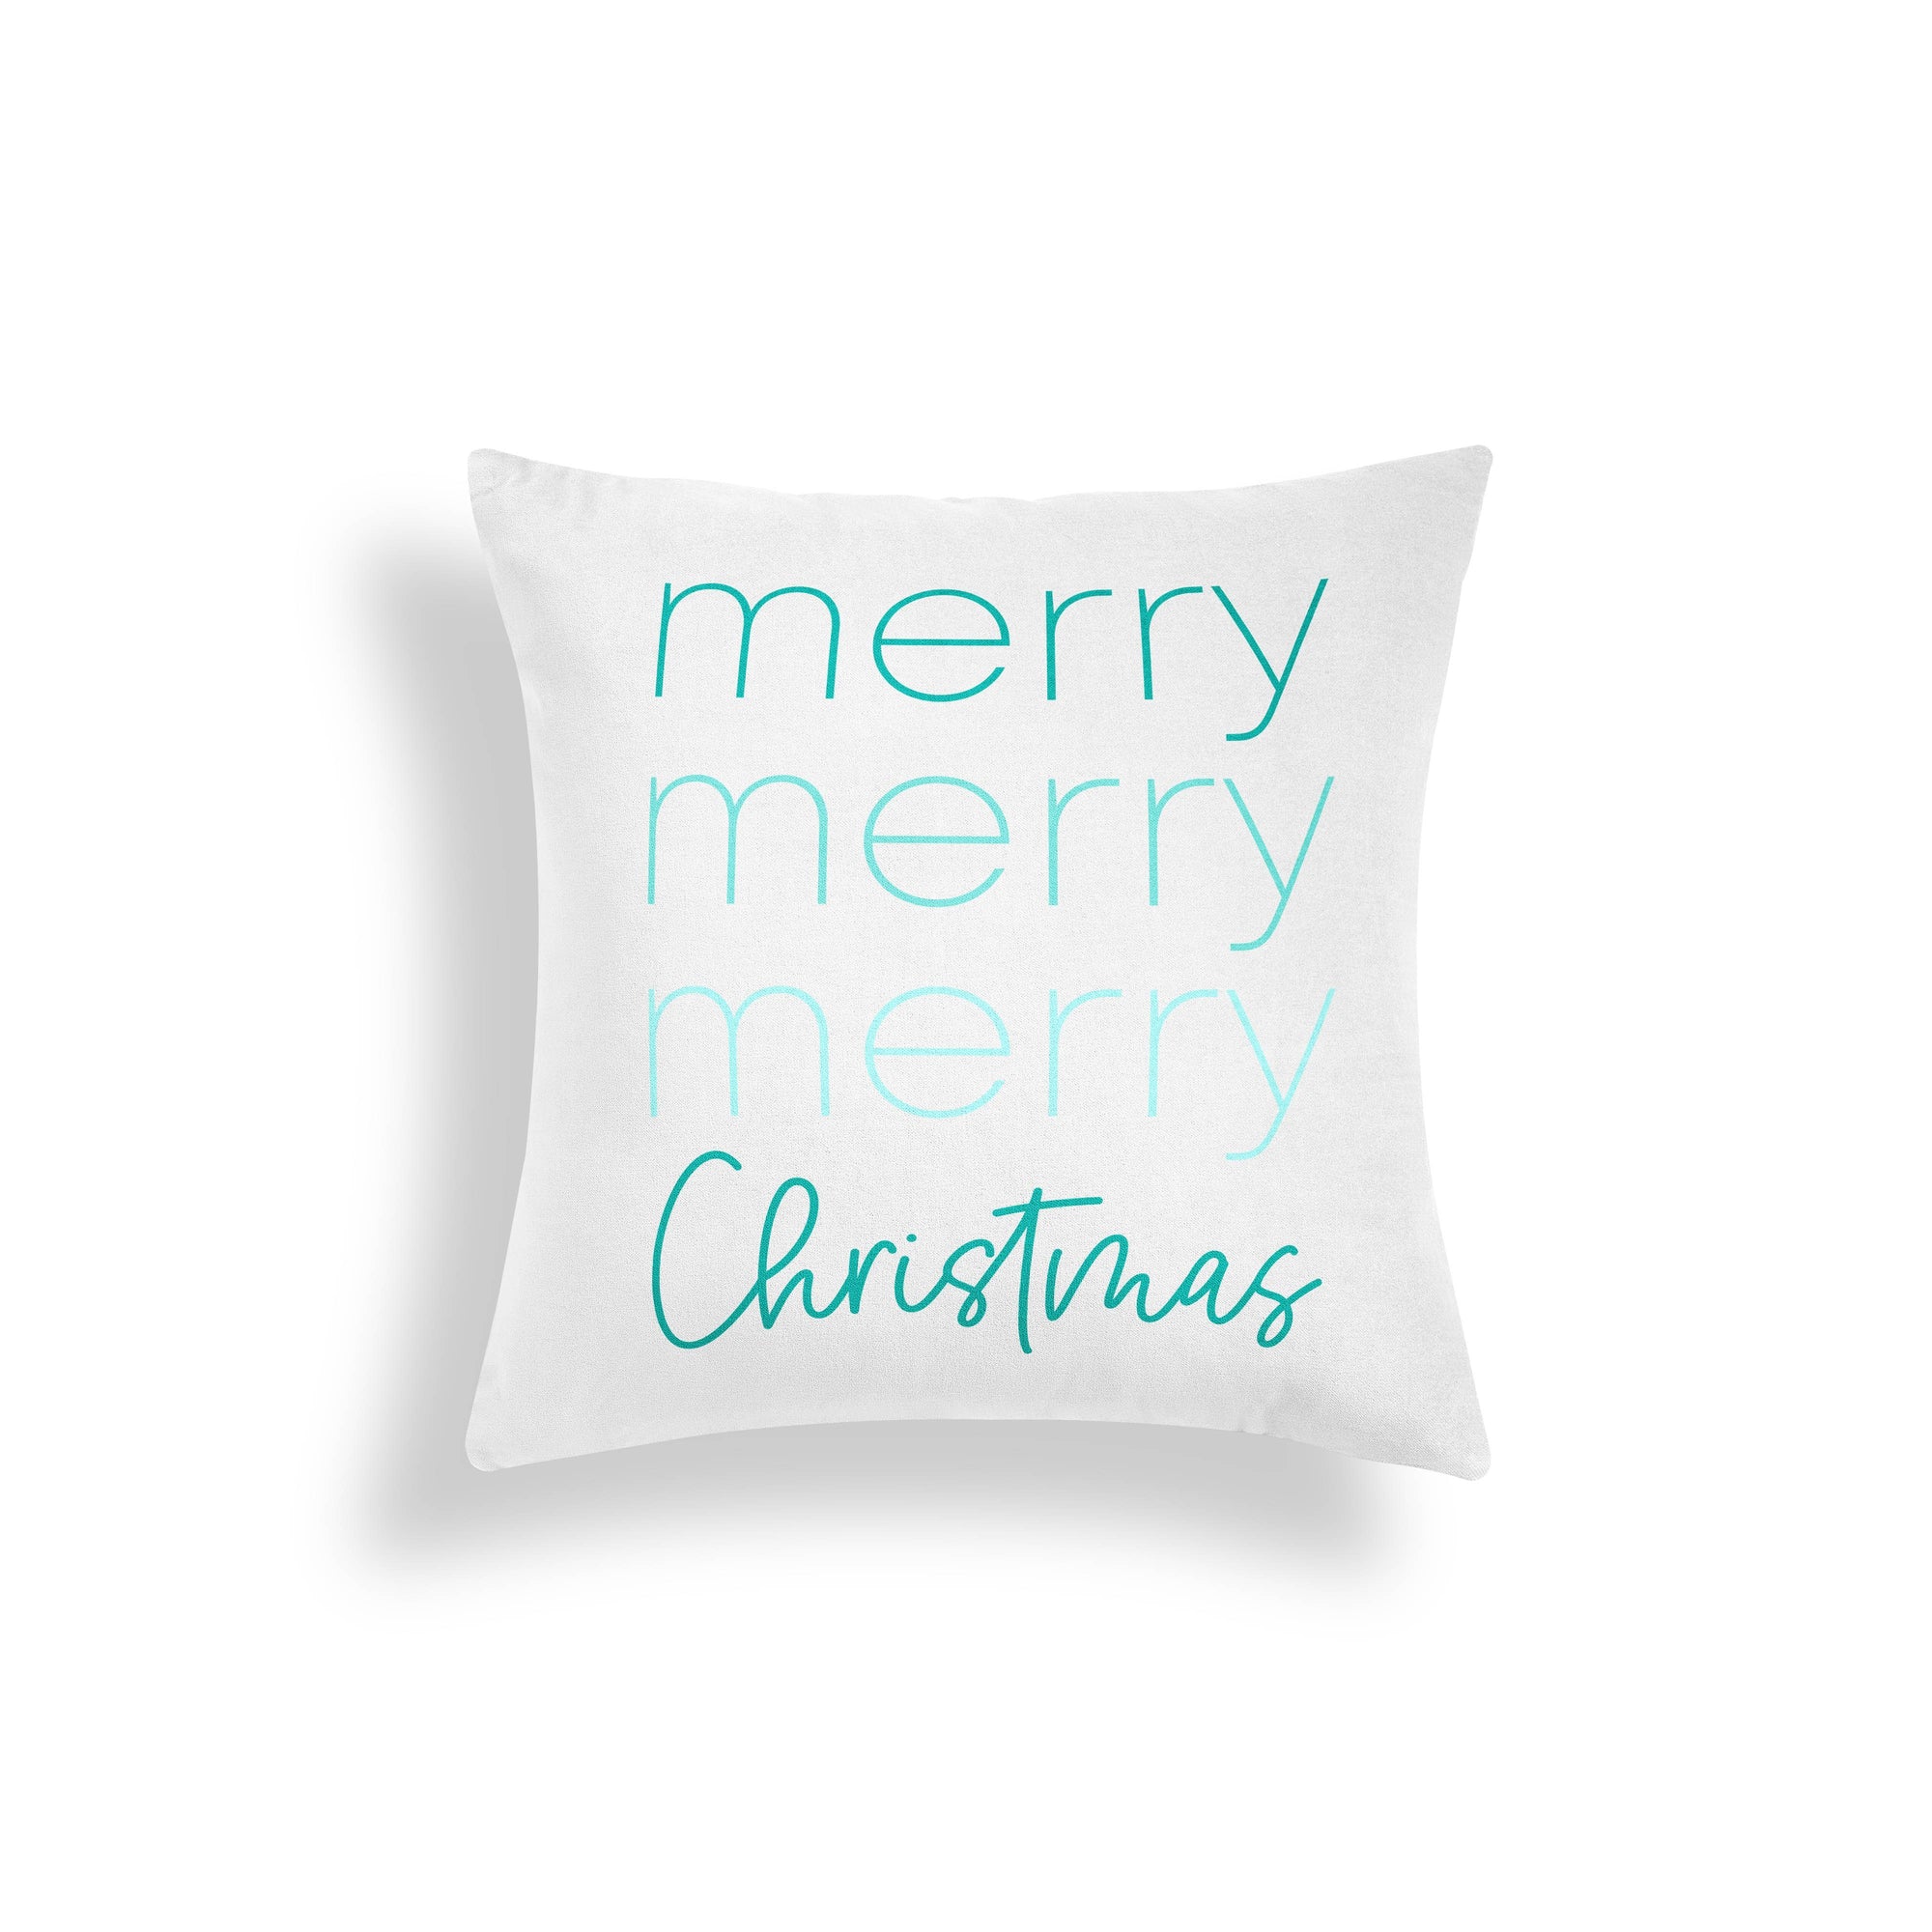 MERRY MERRY CHRISTMAS - TEAL- THROW PILLOW (COVER ONLY)